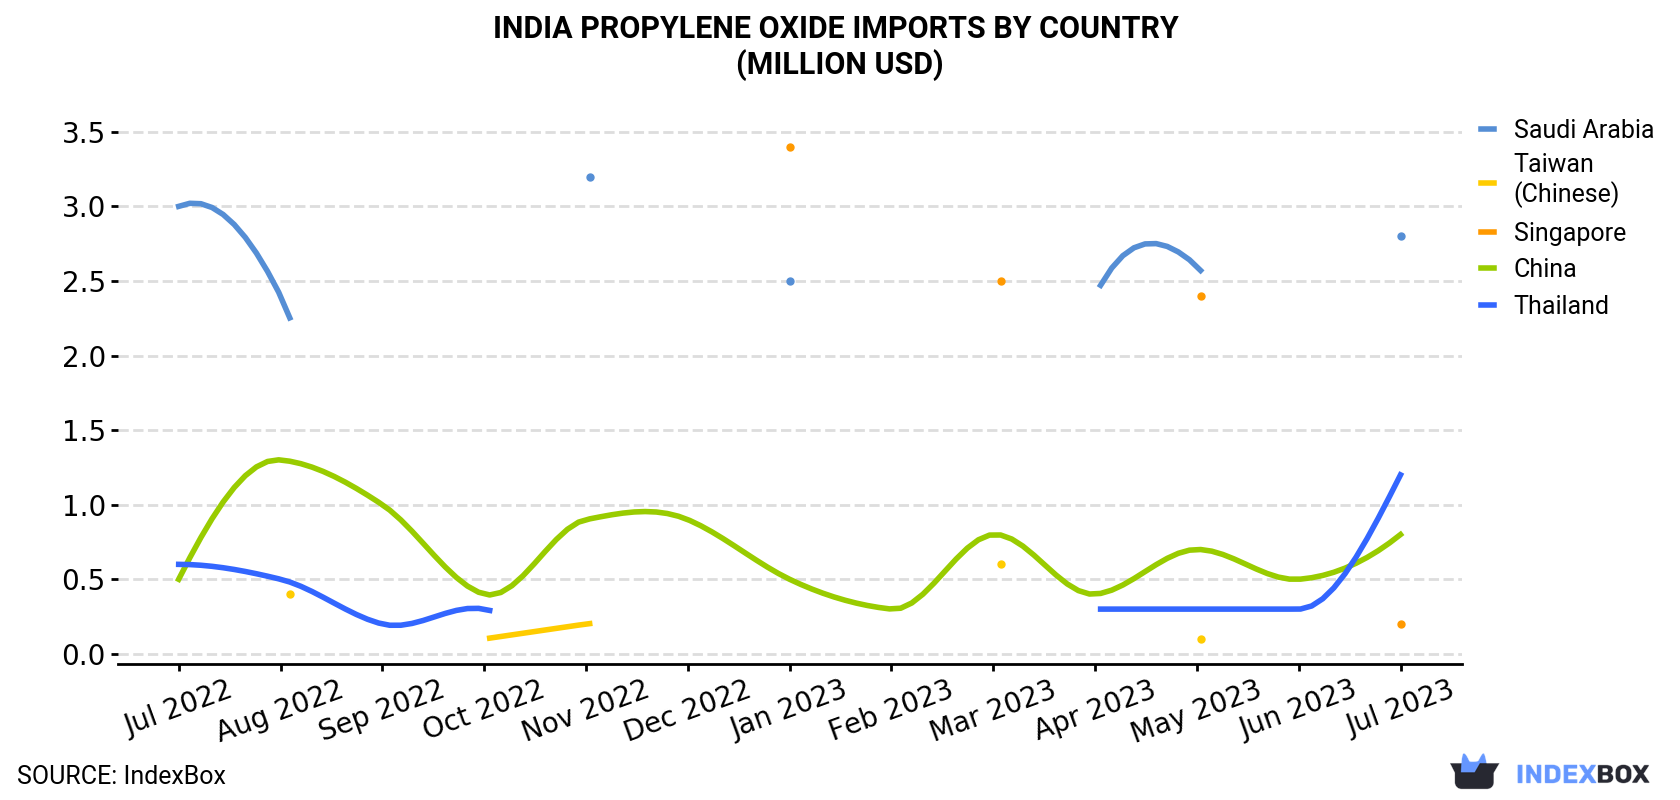 India Propylene Oxide Imports By Country (Million USD)